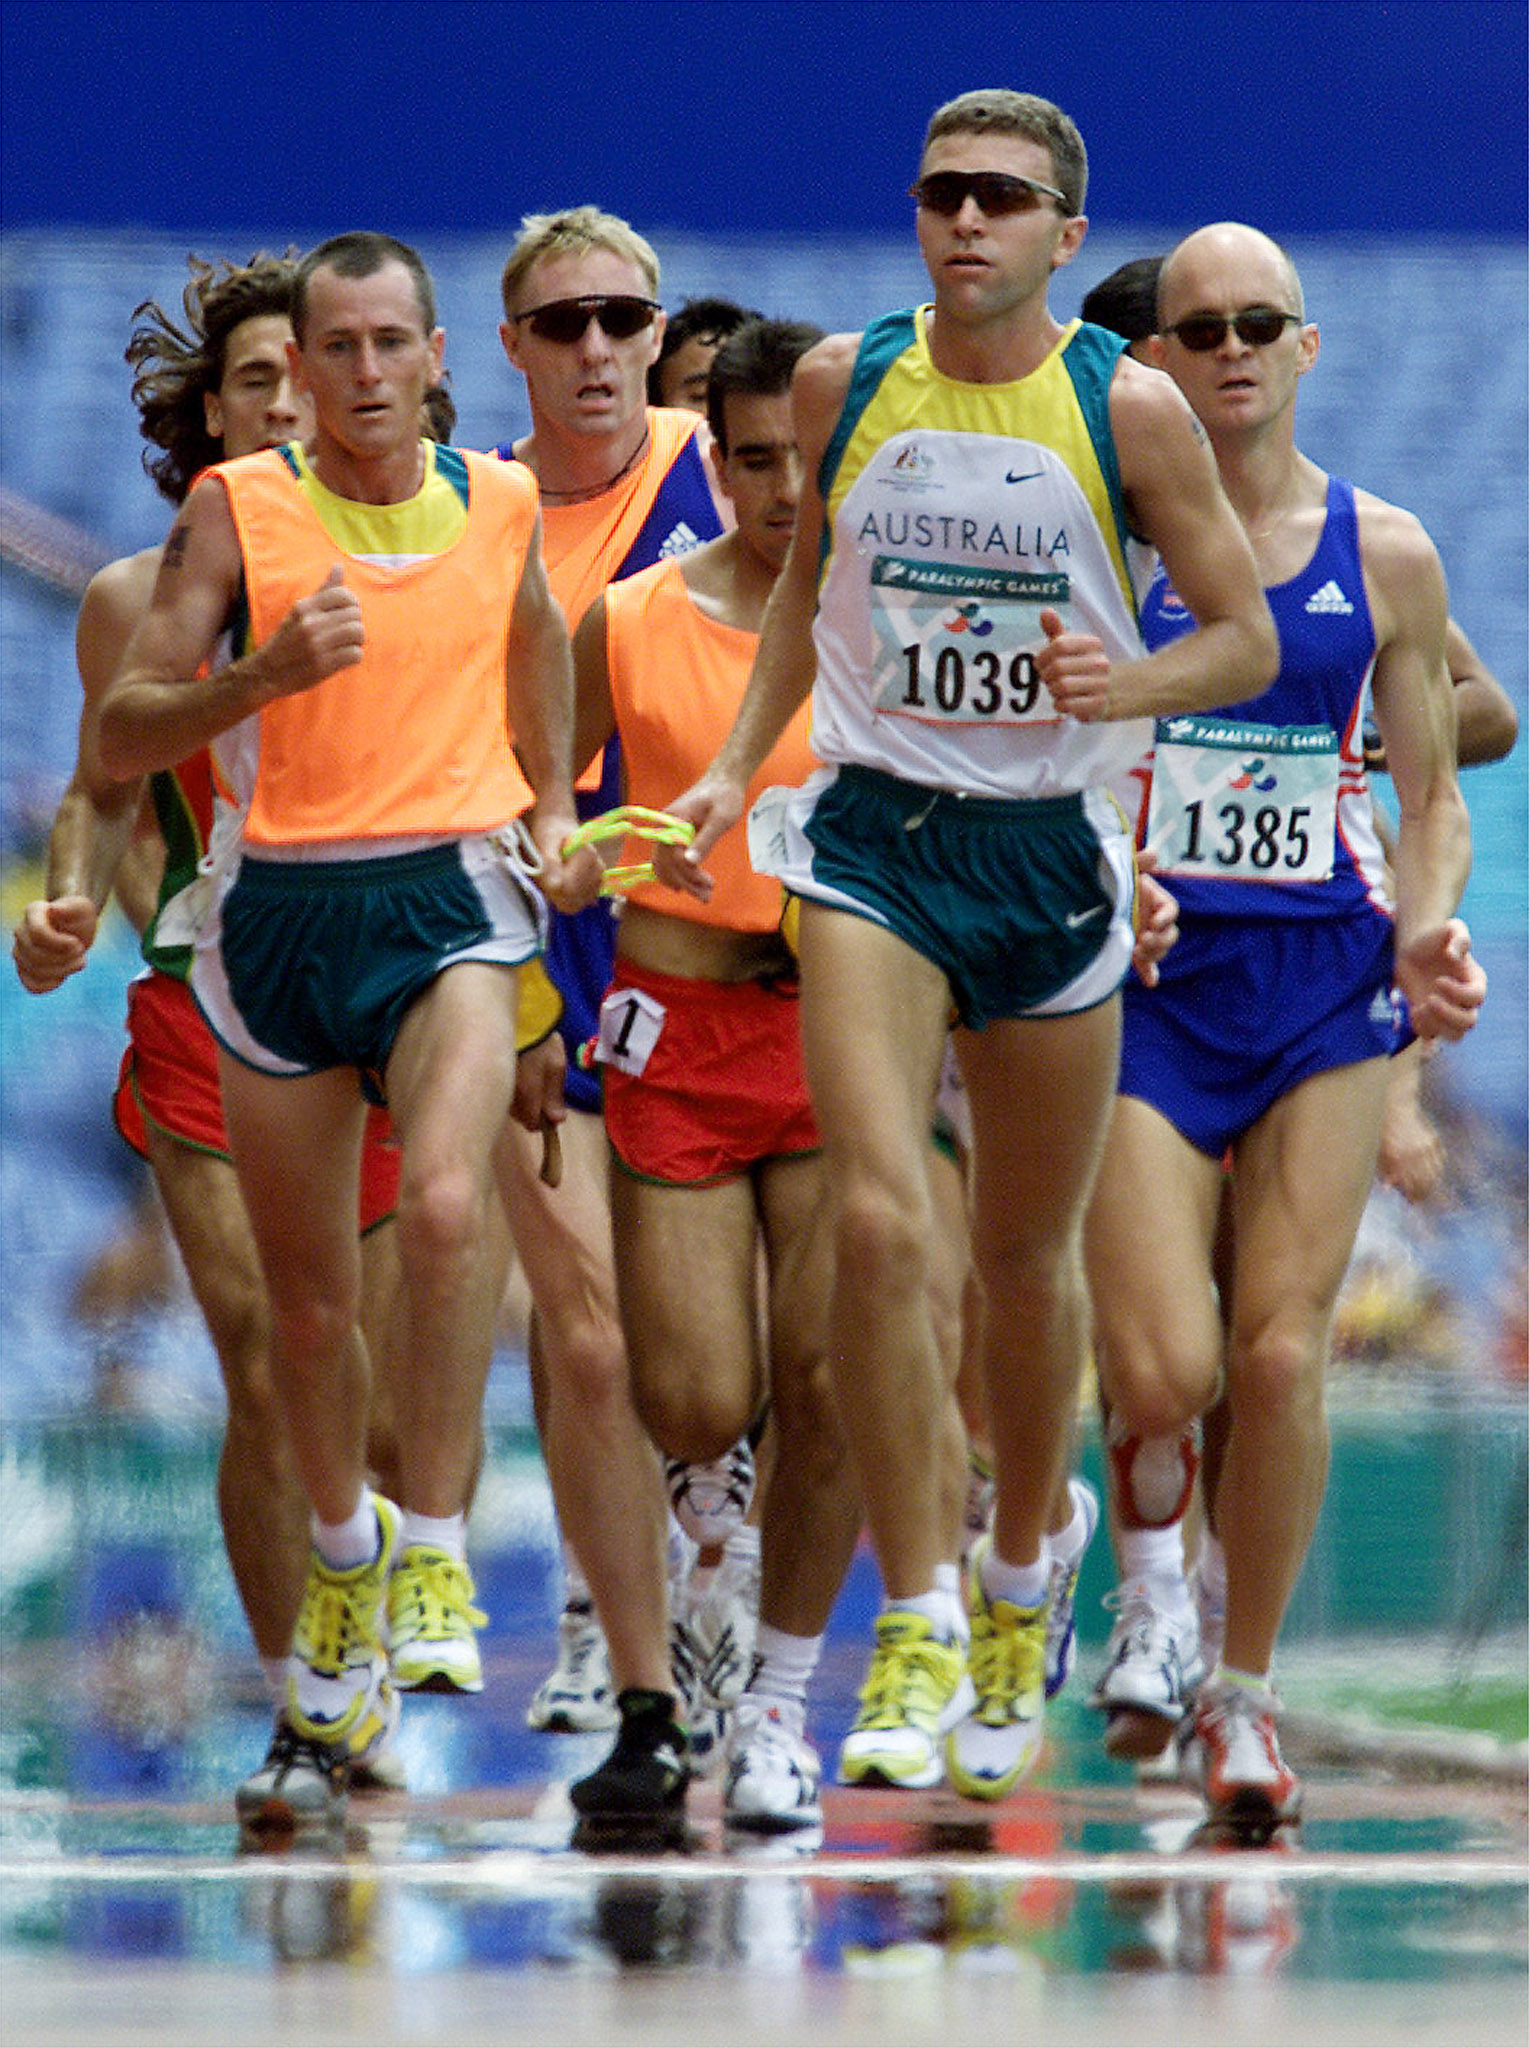 blind runner gerrard gosens holds onto a tether to his guide while in motion on a track at the sydney 2000 olympics